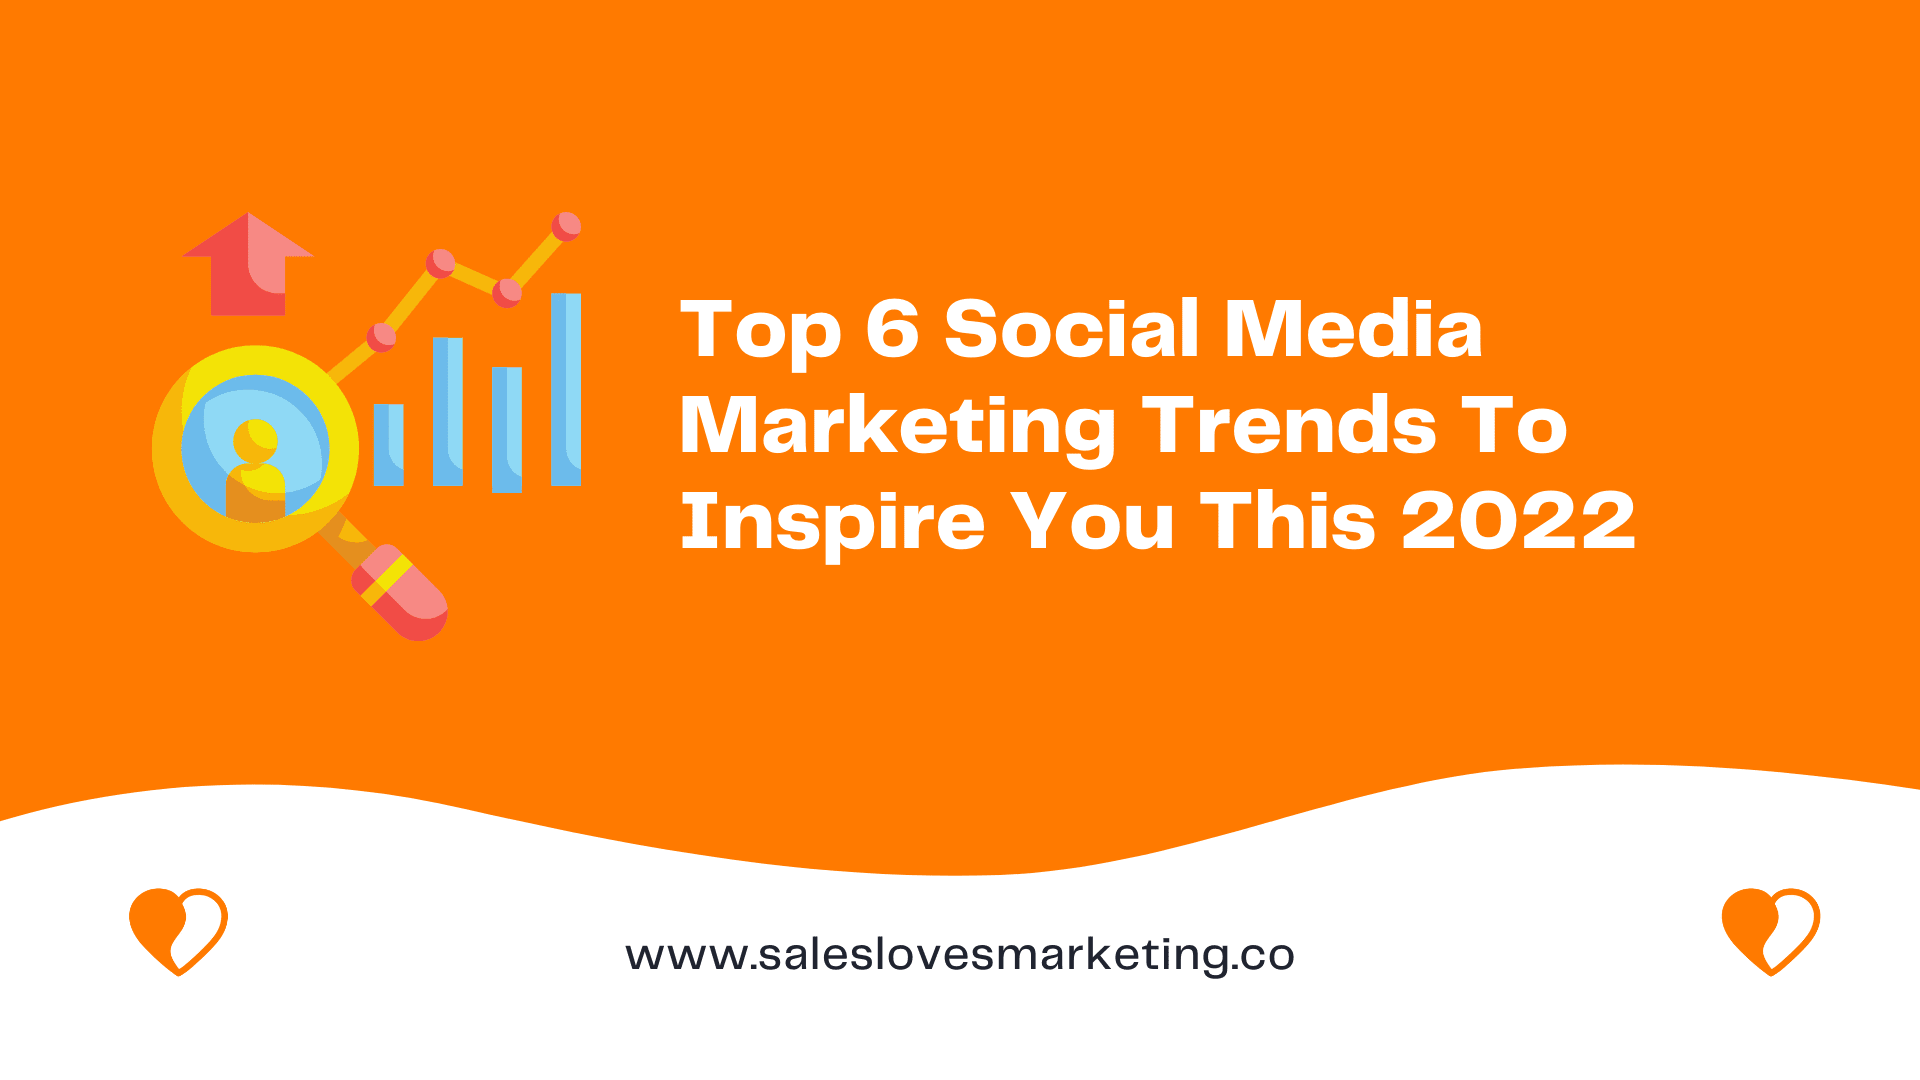 Top 6 Social Media Marketing Trends To Inspire You This 2022